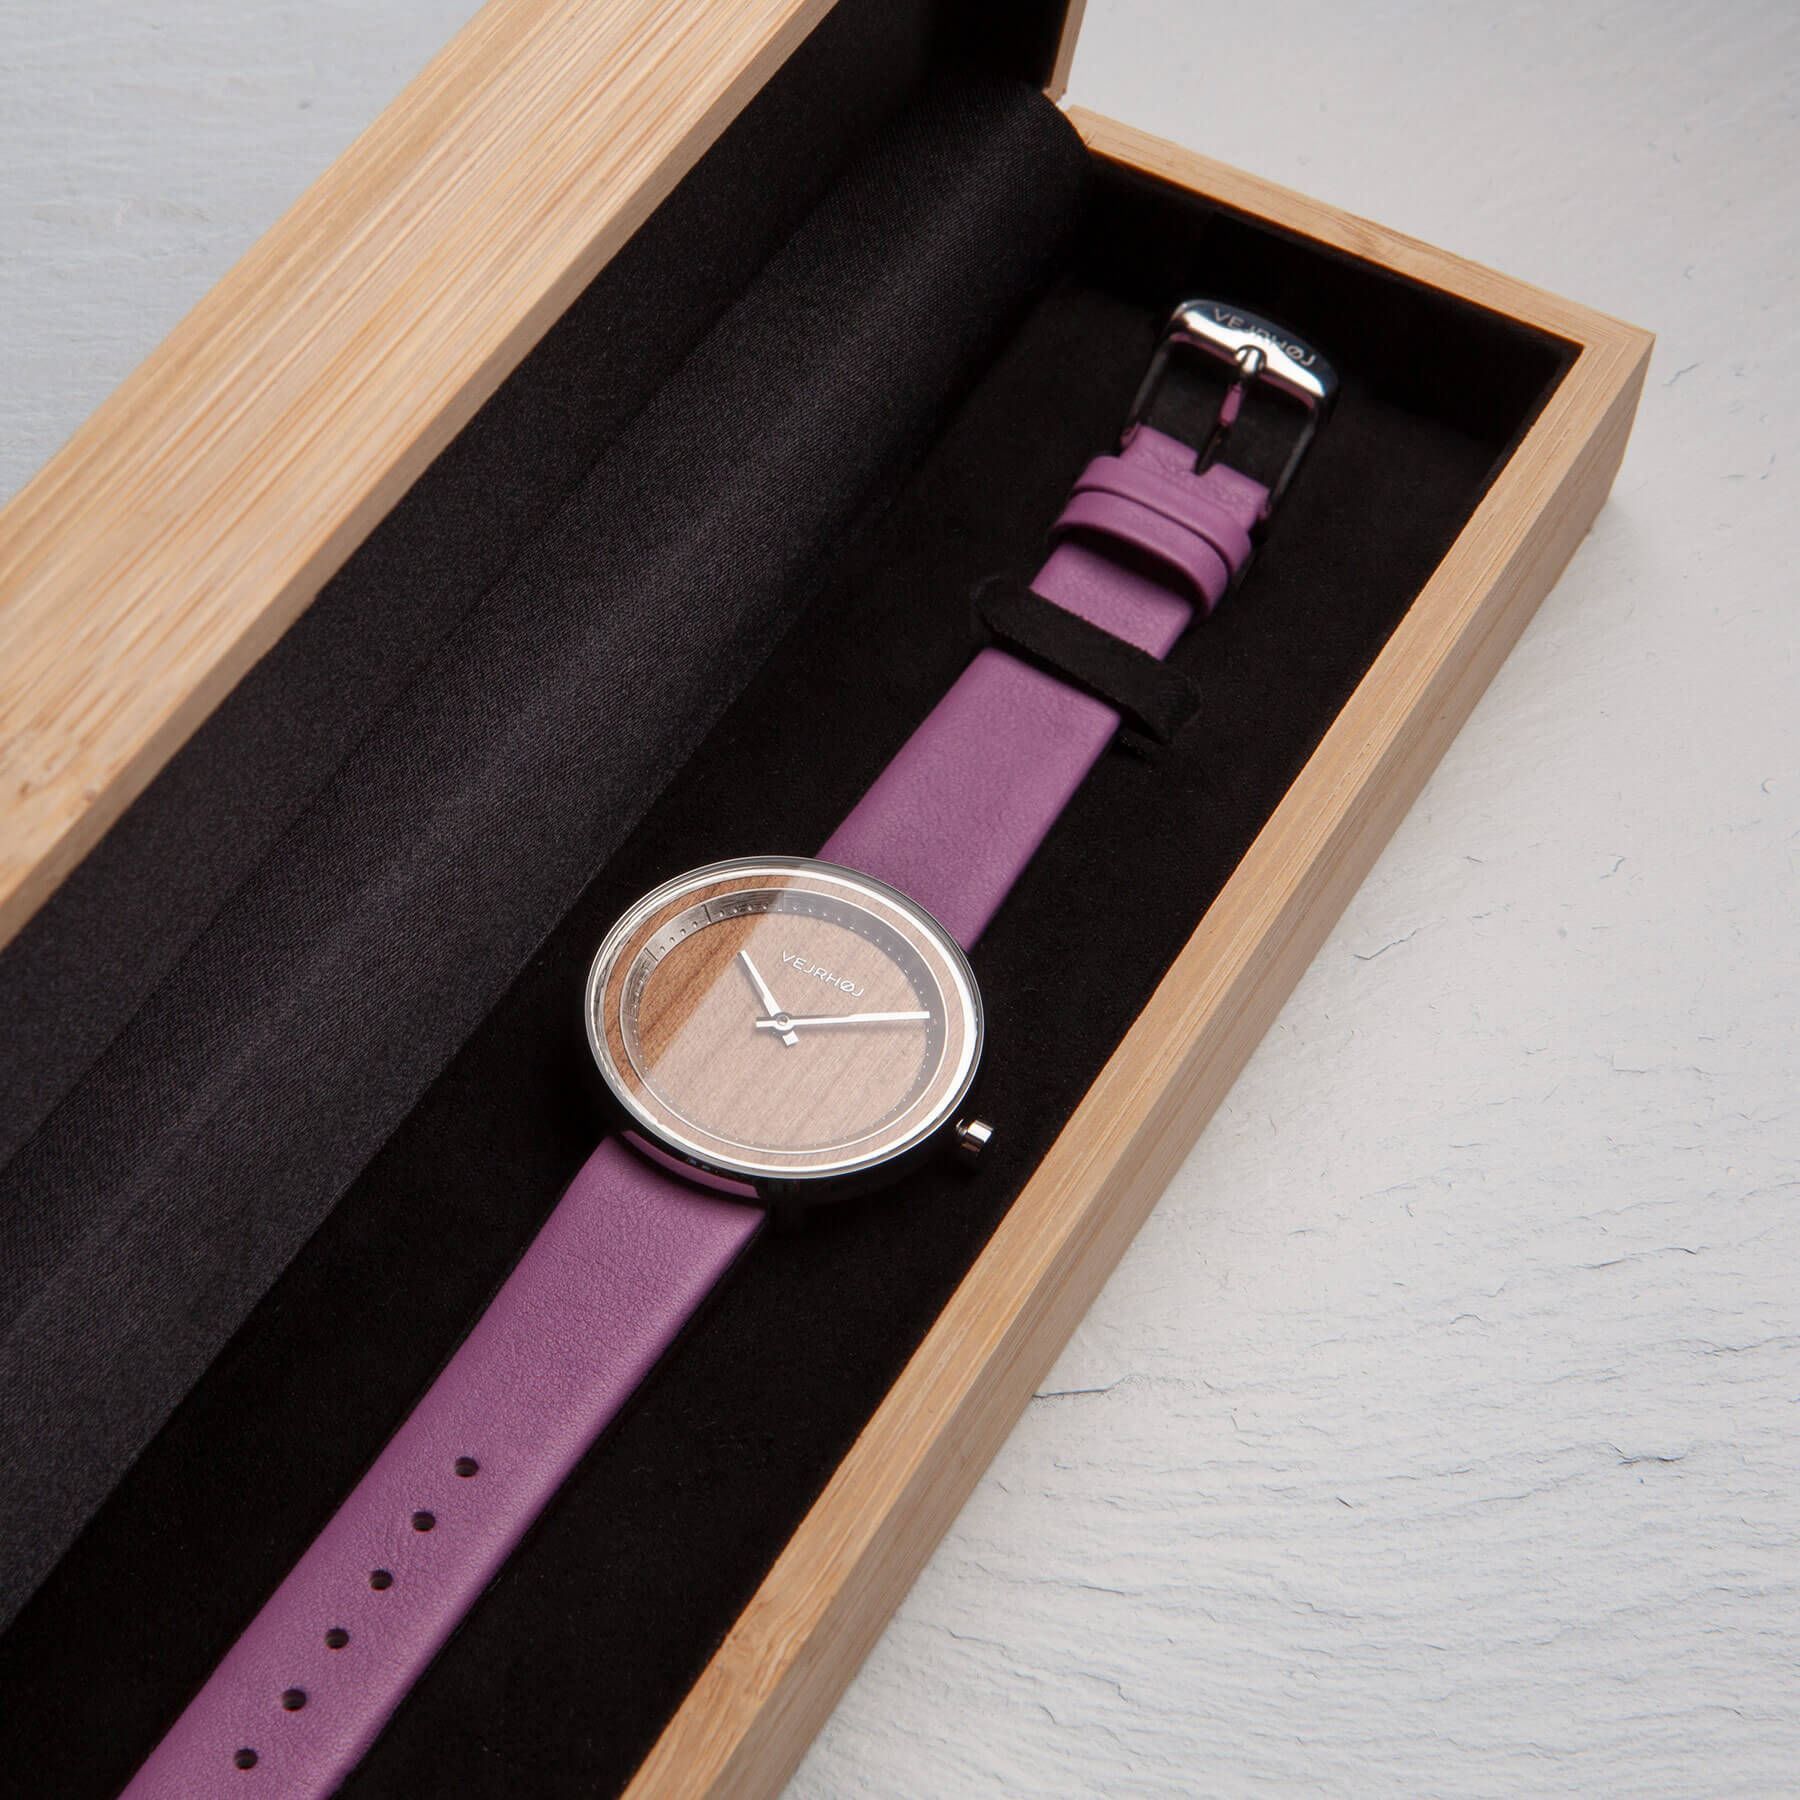 Wooden watch with steel casing and pink straps inside bamboo box